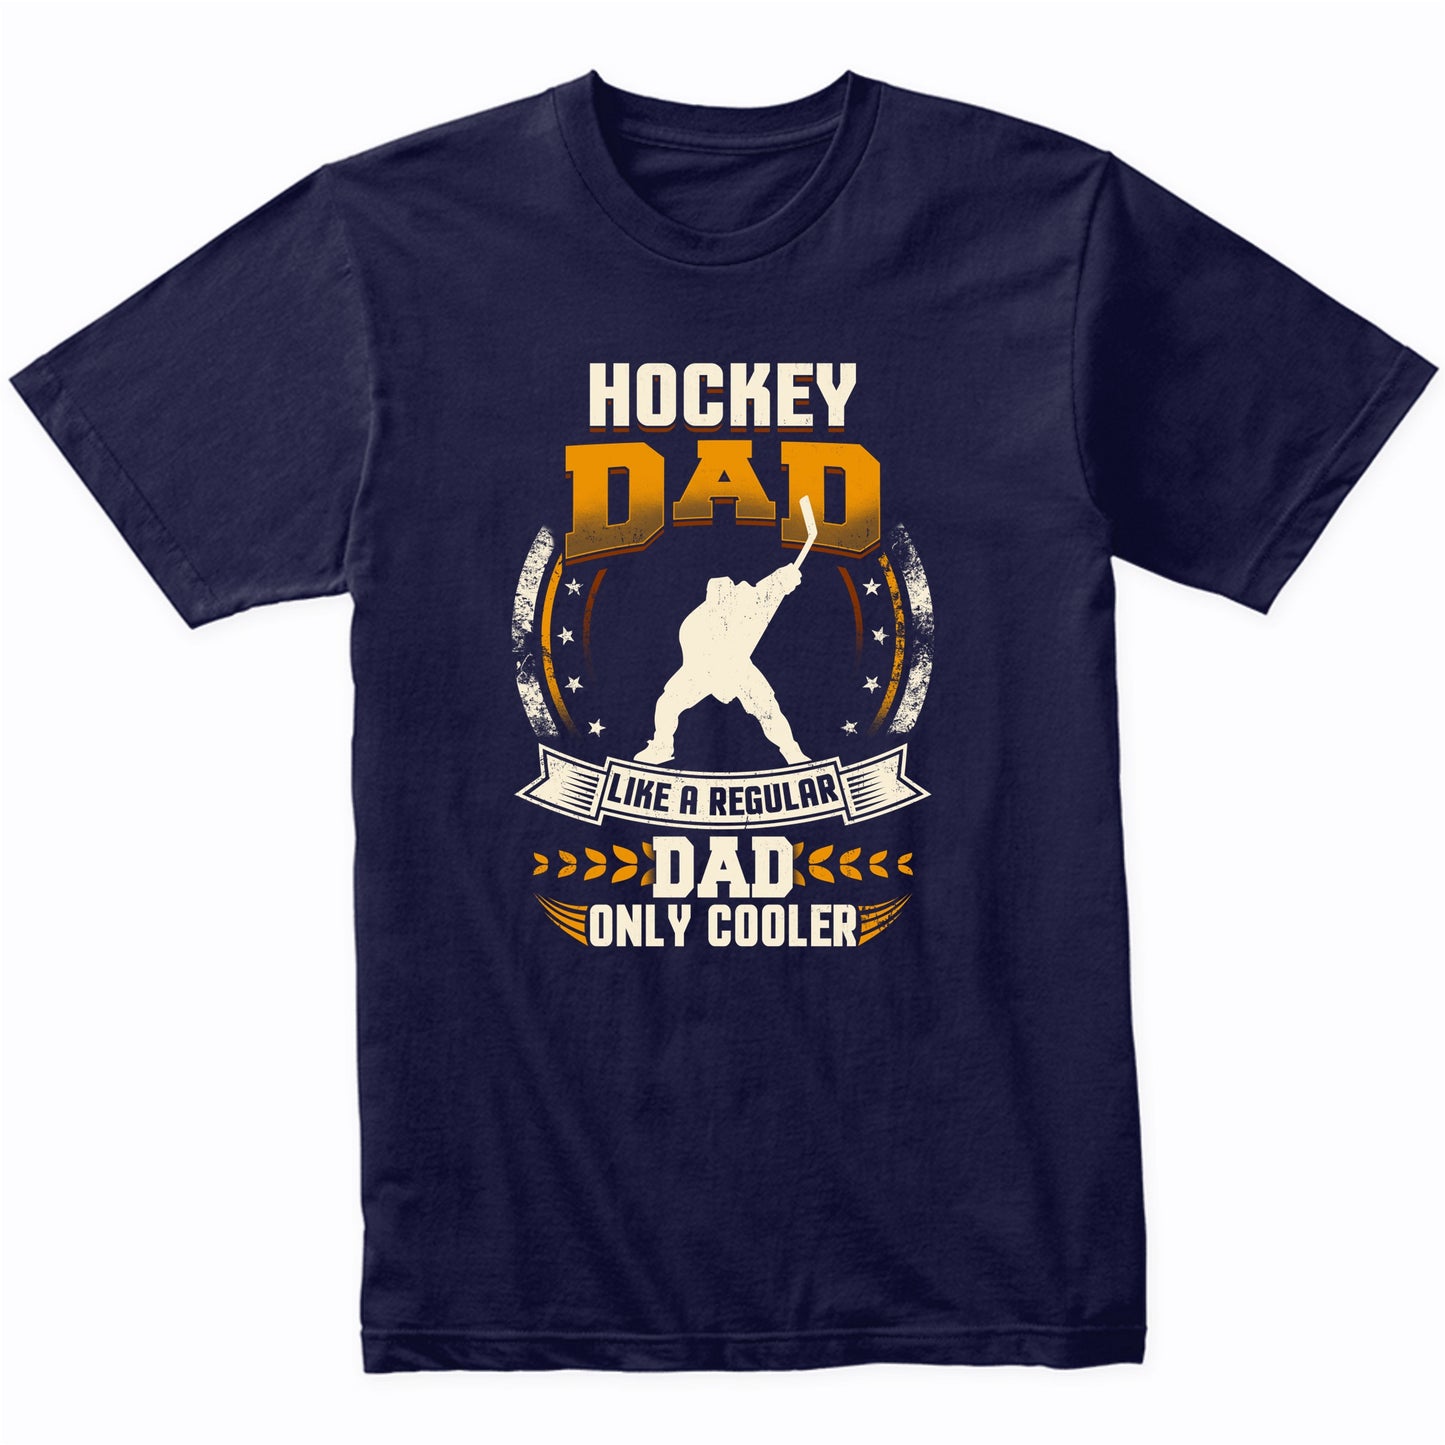 Hockey Dad Like A Regular Dad Only Cooler Funny T-Shirt